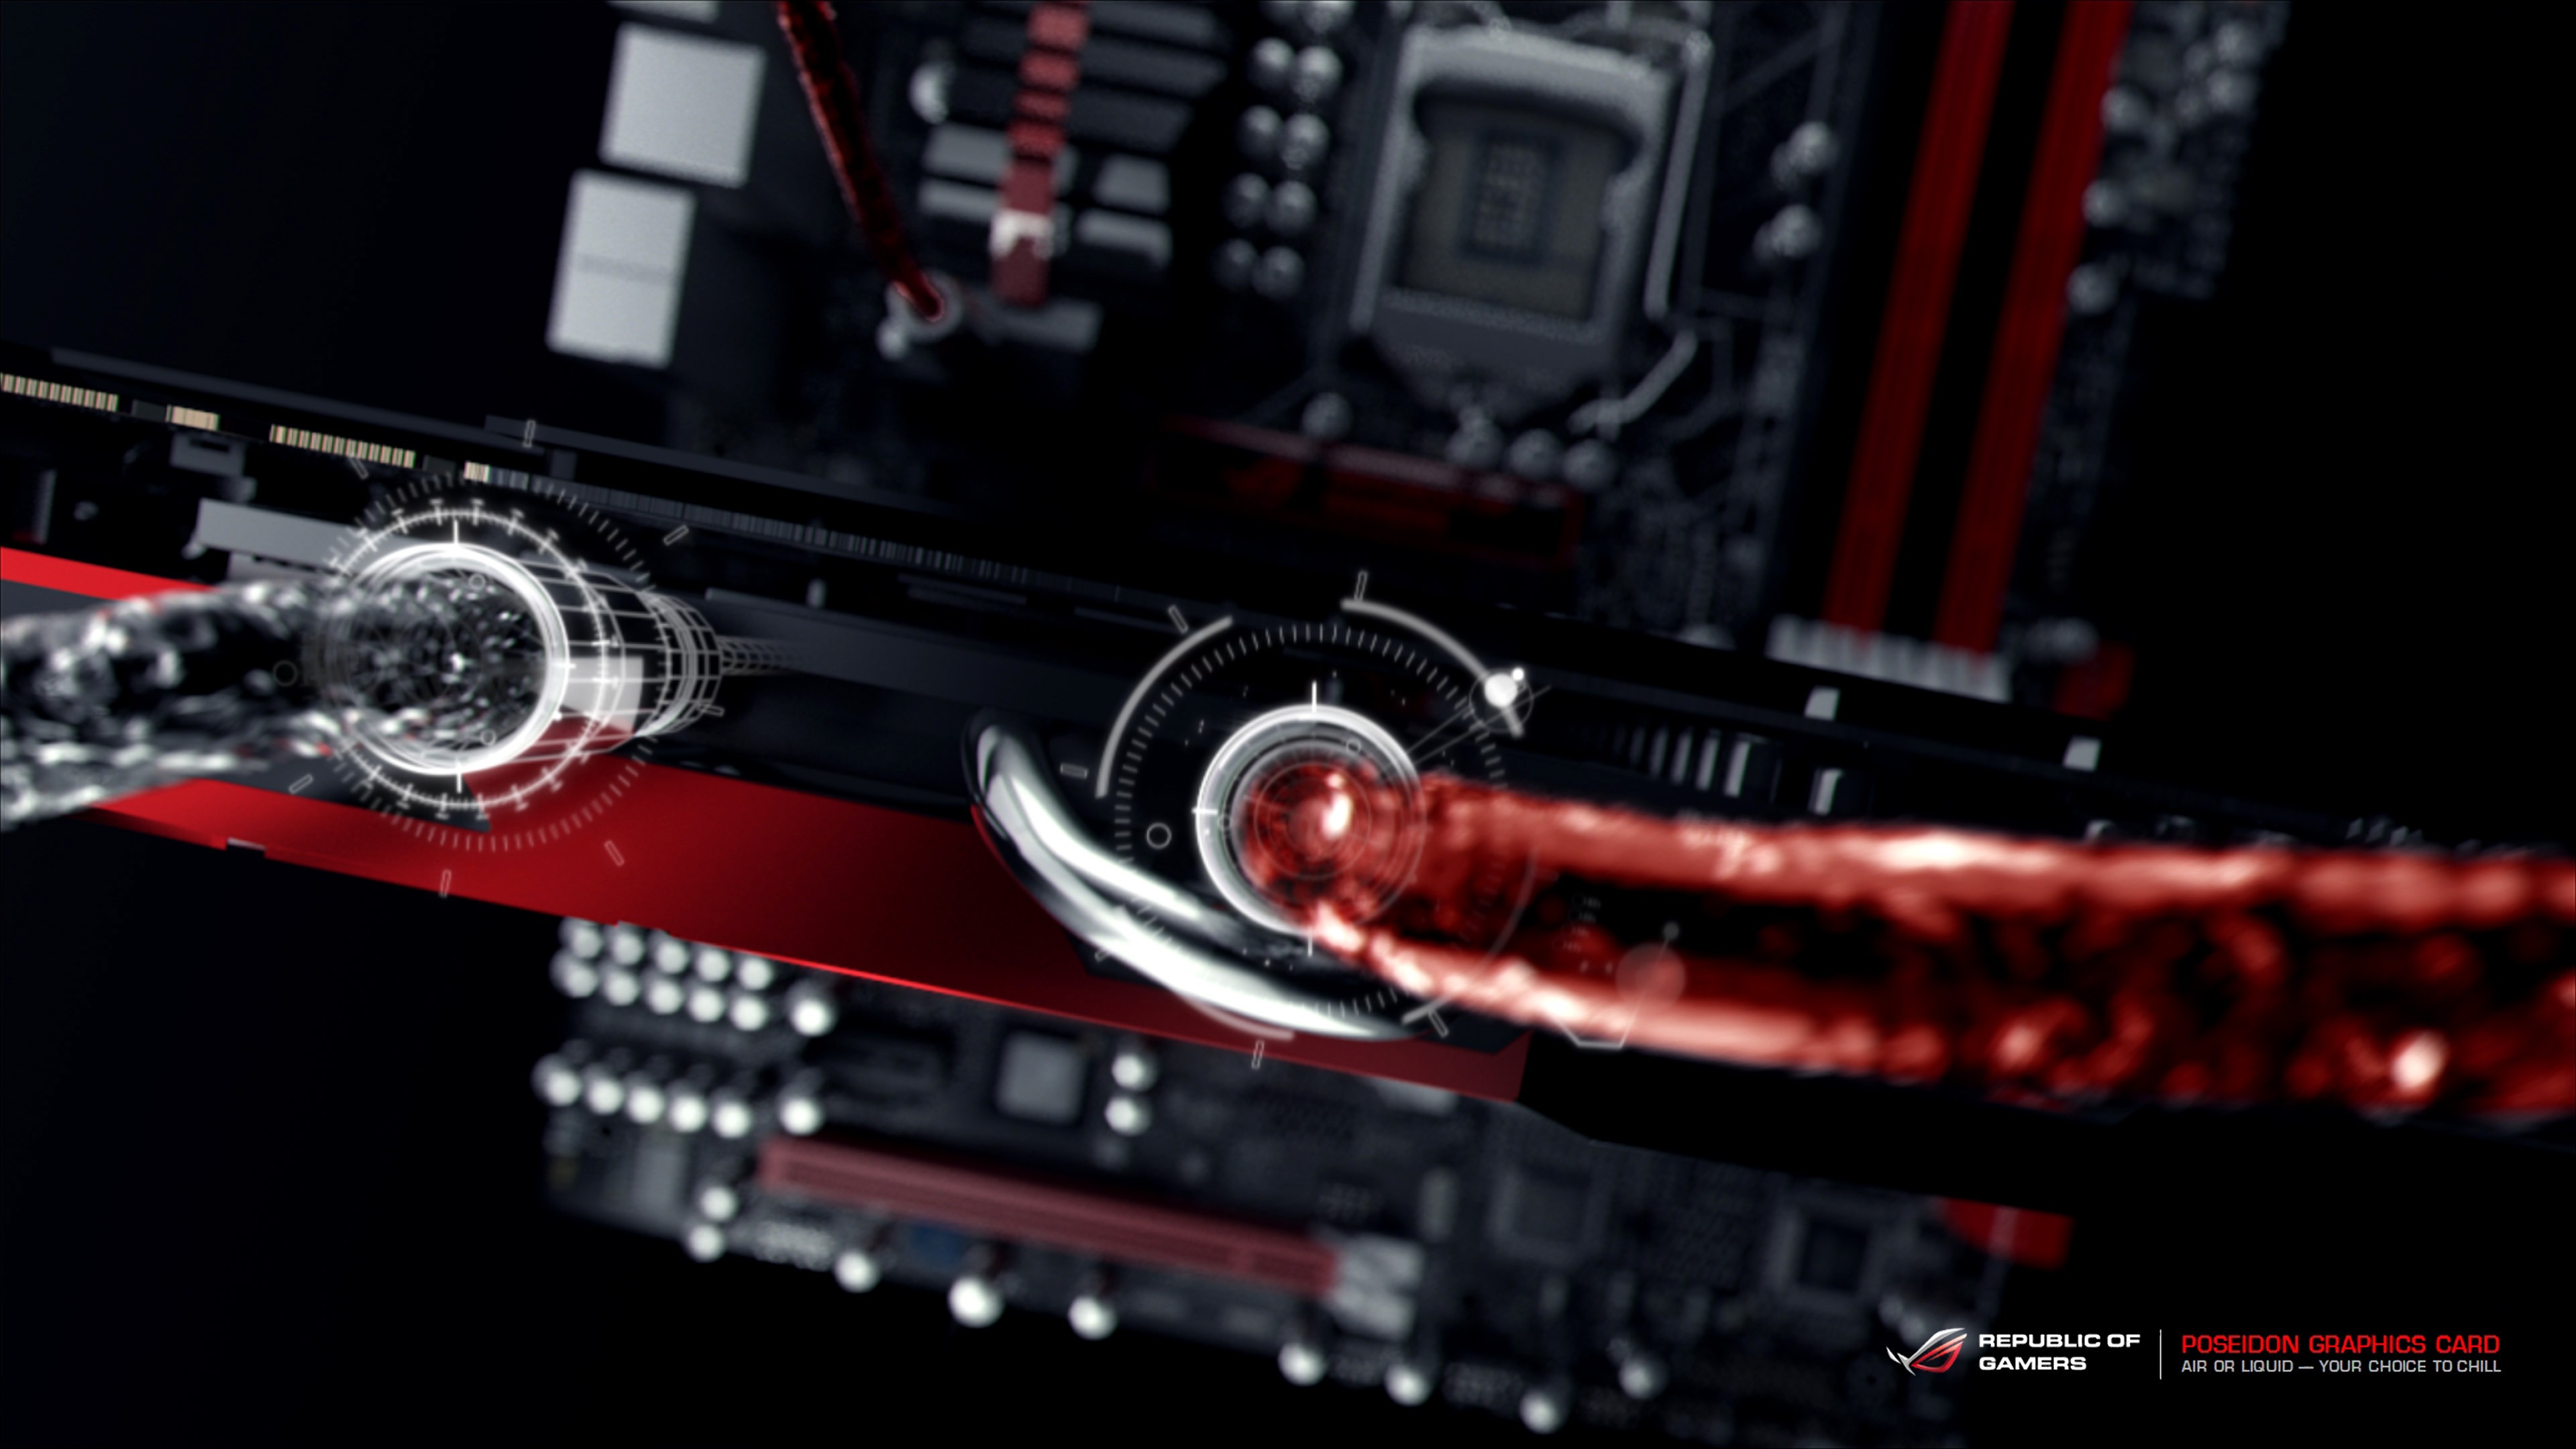 General 3840x2160 Republic of Gamers computer PC gaming technology GPUs water cooling hardware closeup watermarked